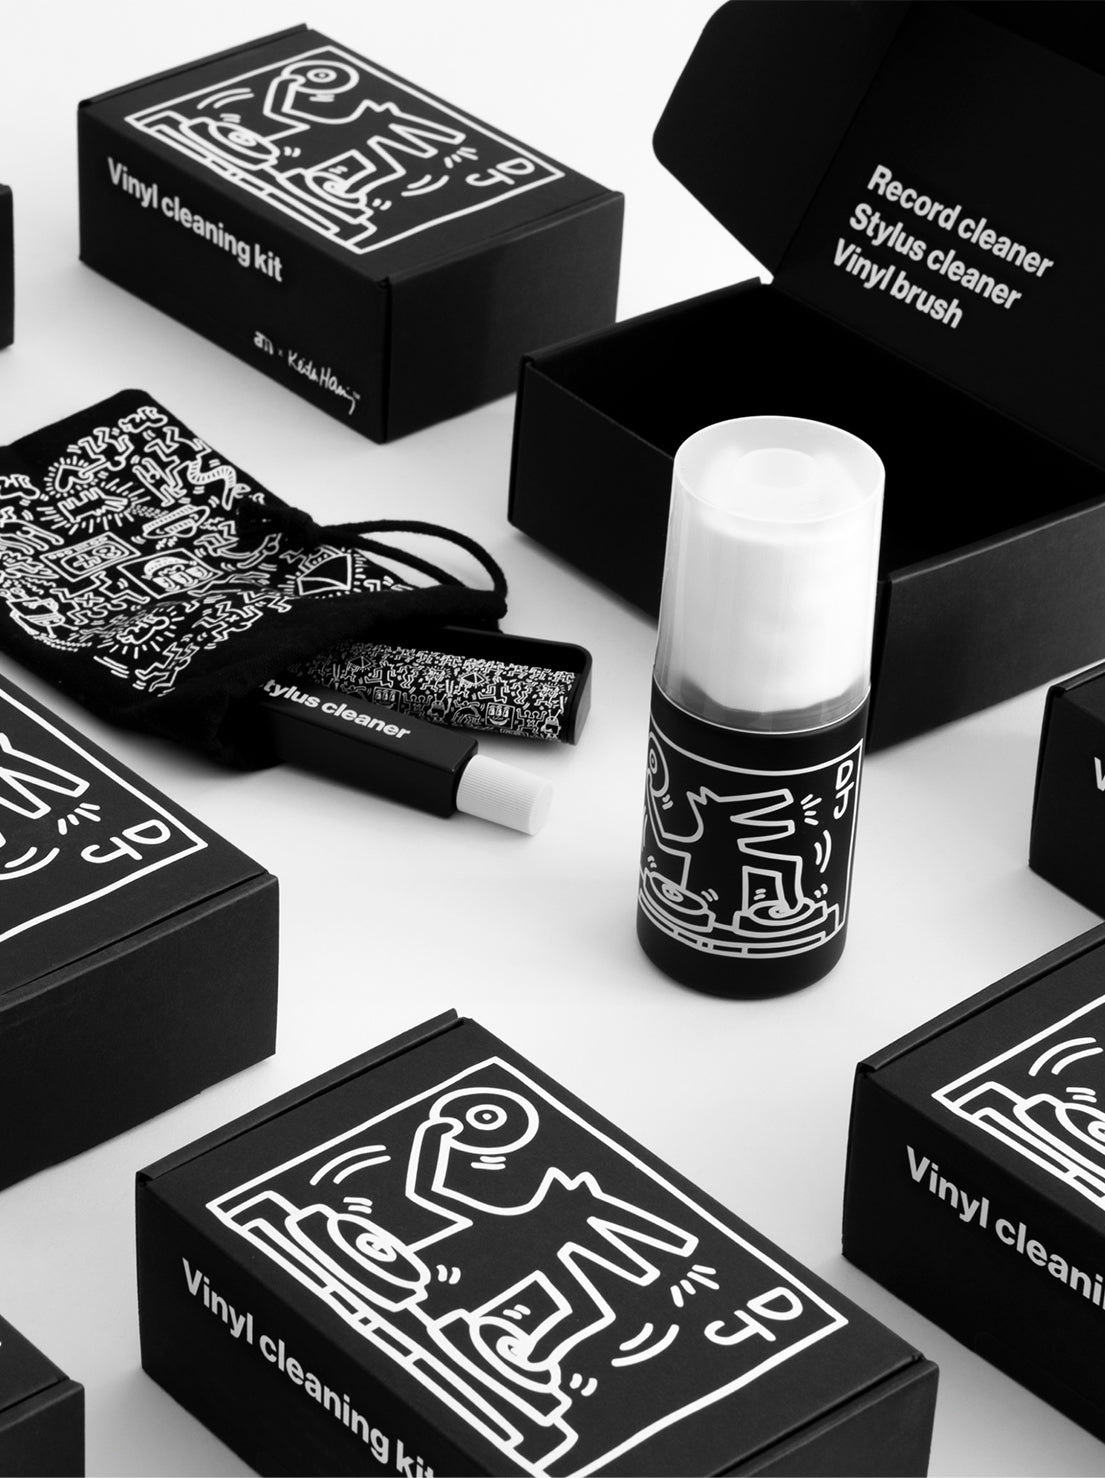 AM - Keith Haring Vinyl Cleaning Kit